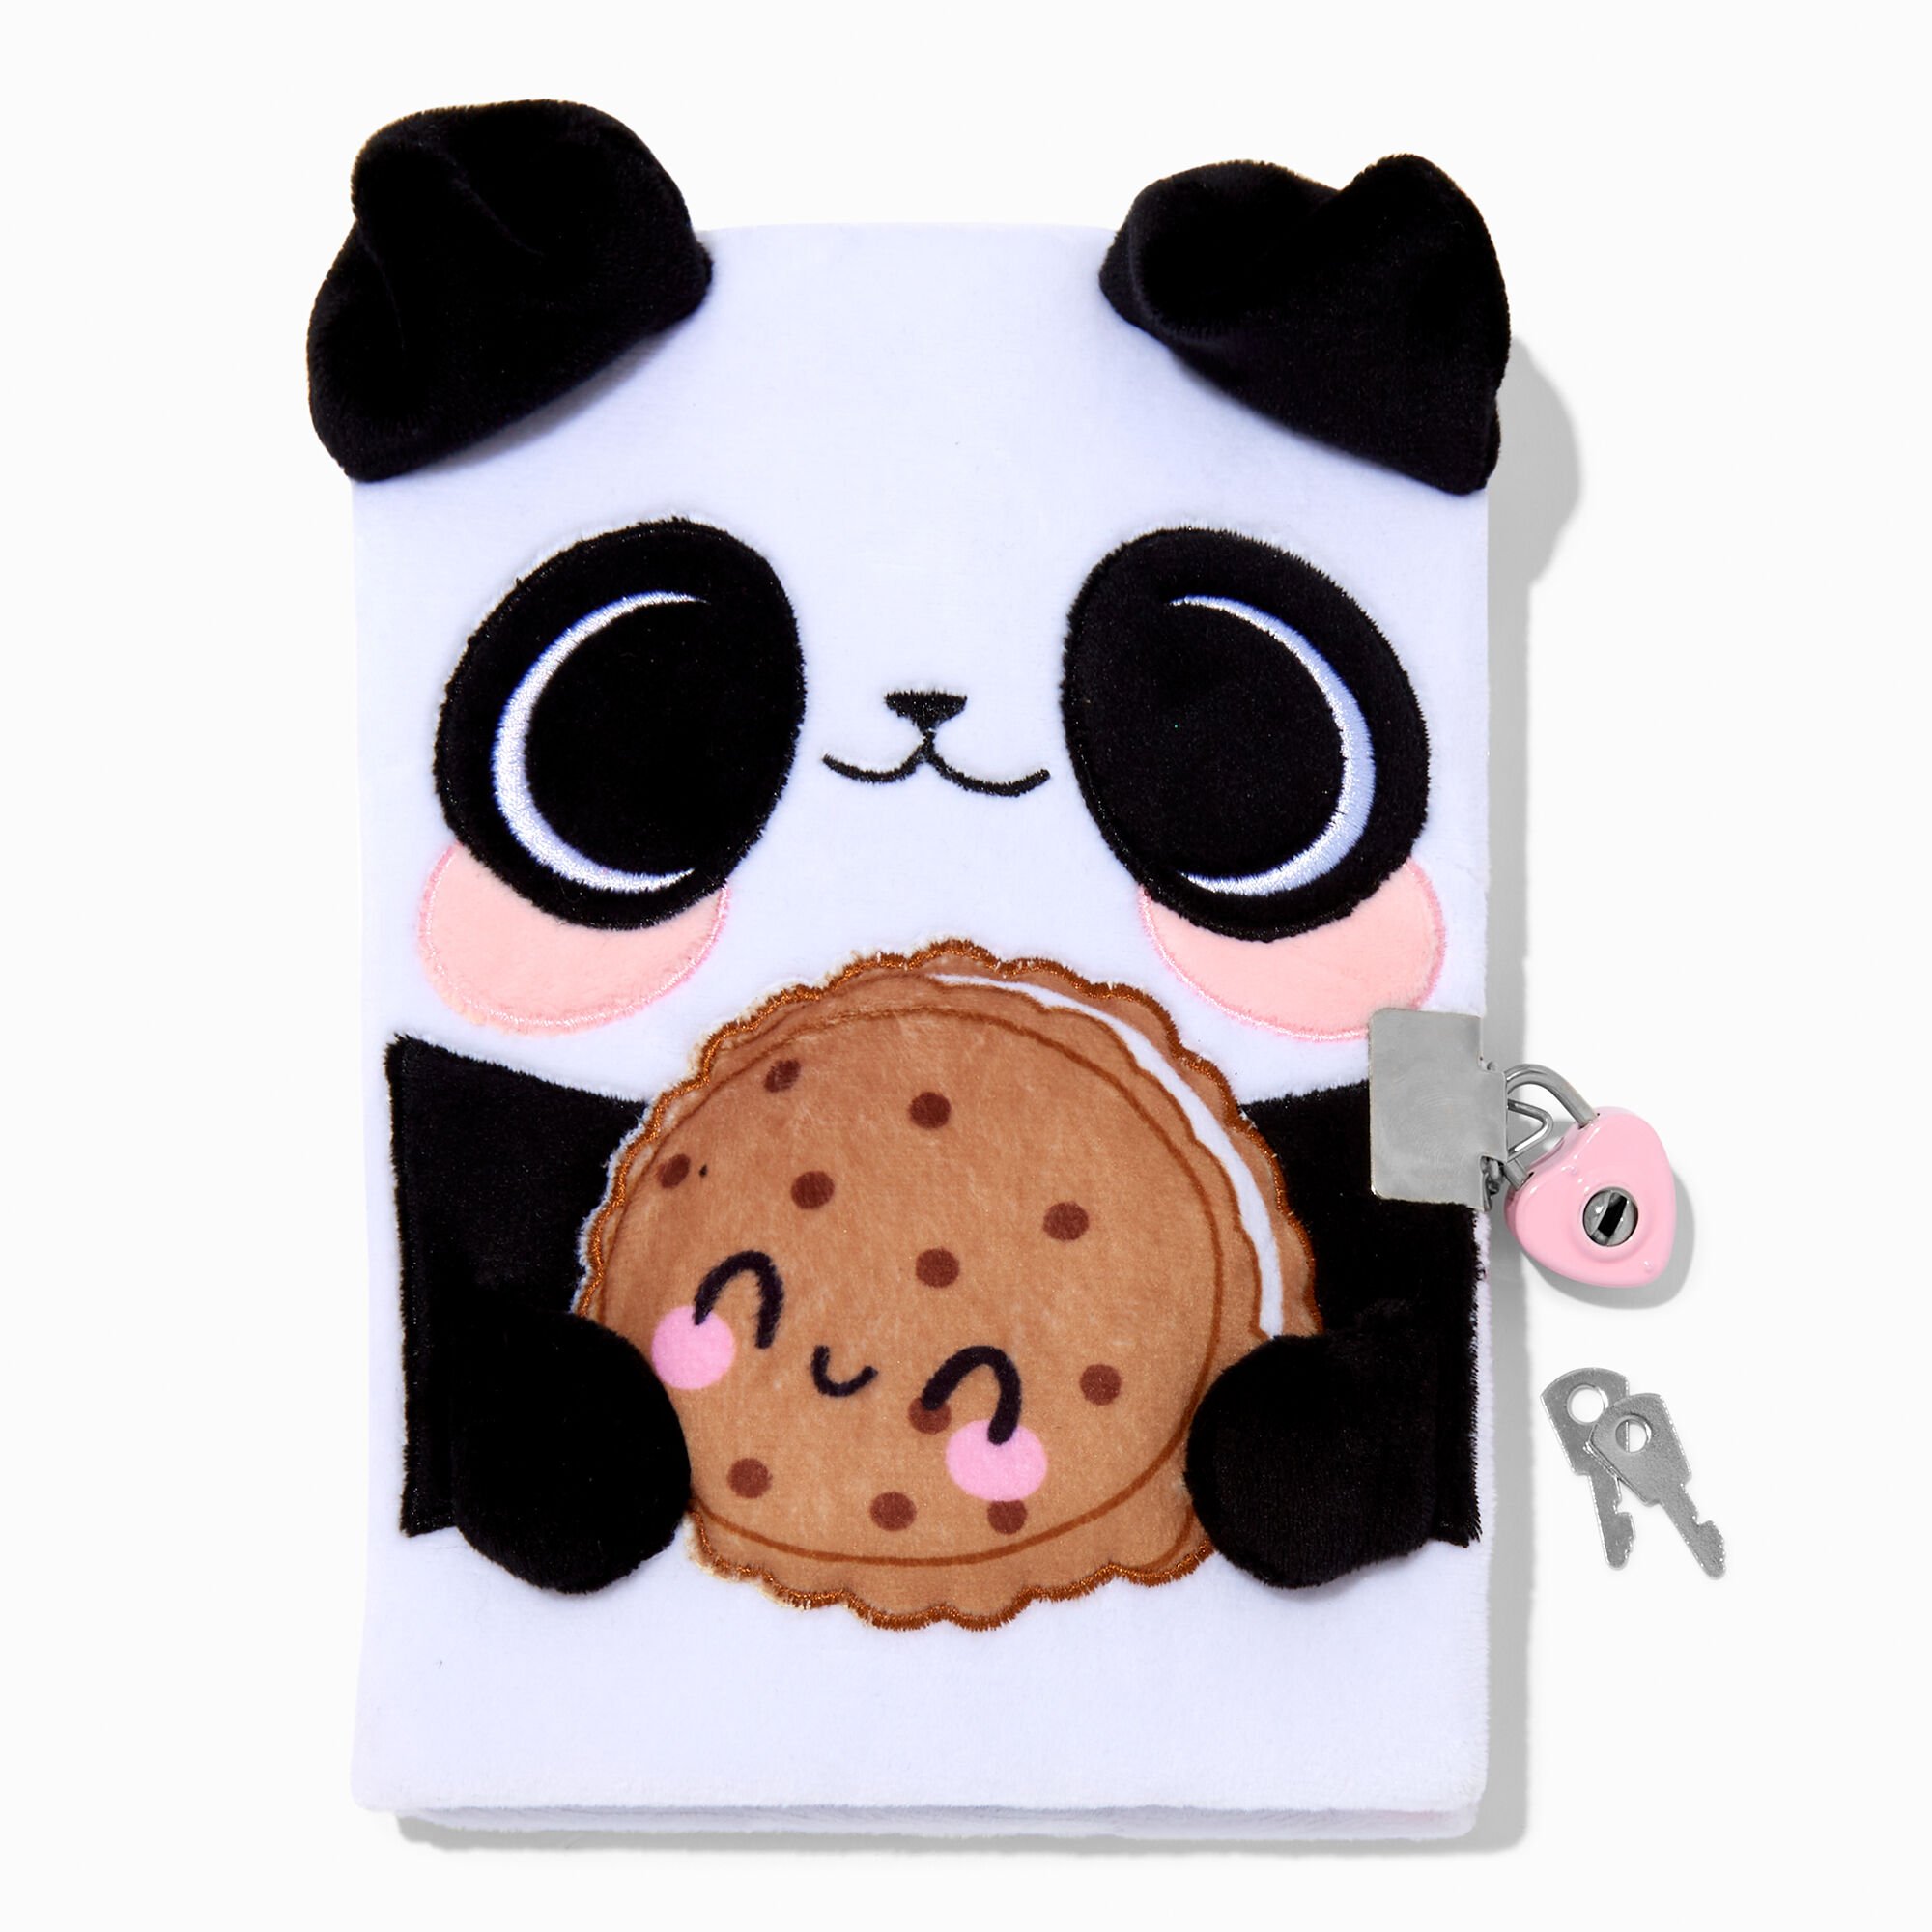 View Claires Panda Cookie Lock Diary information